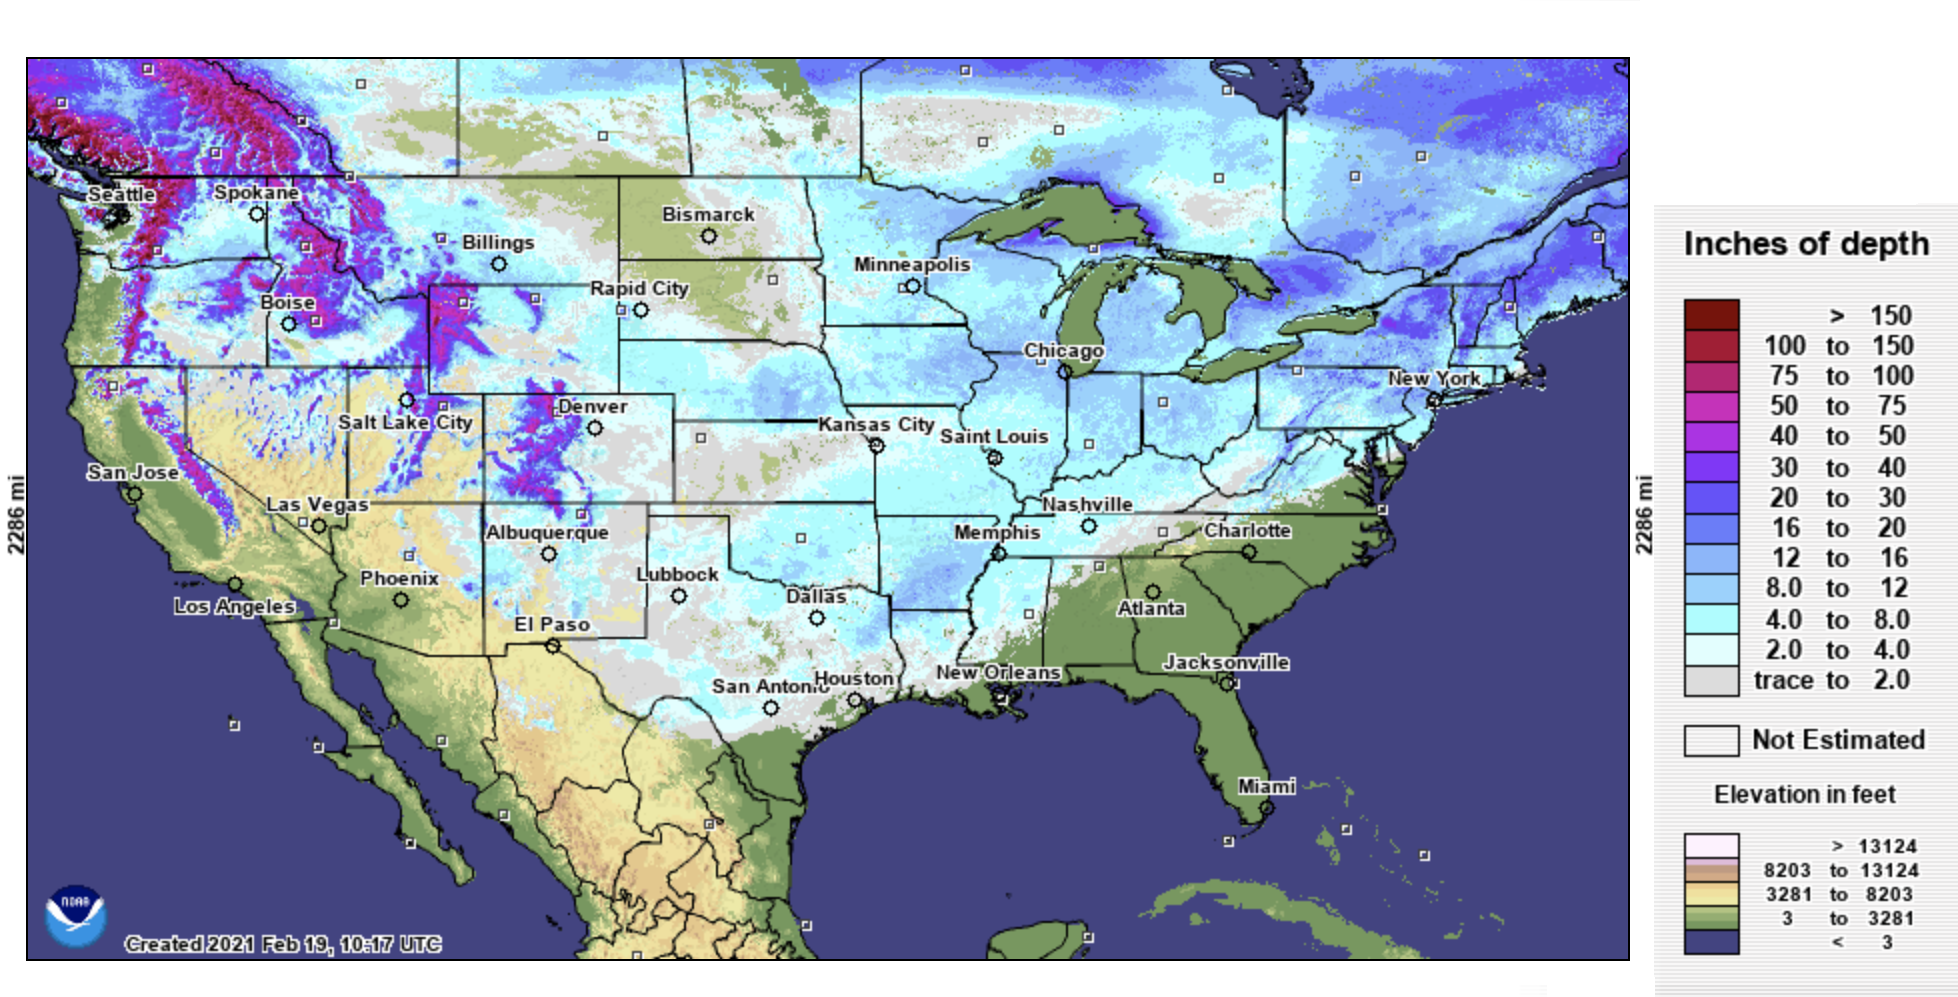 U.S Snow Cover Map